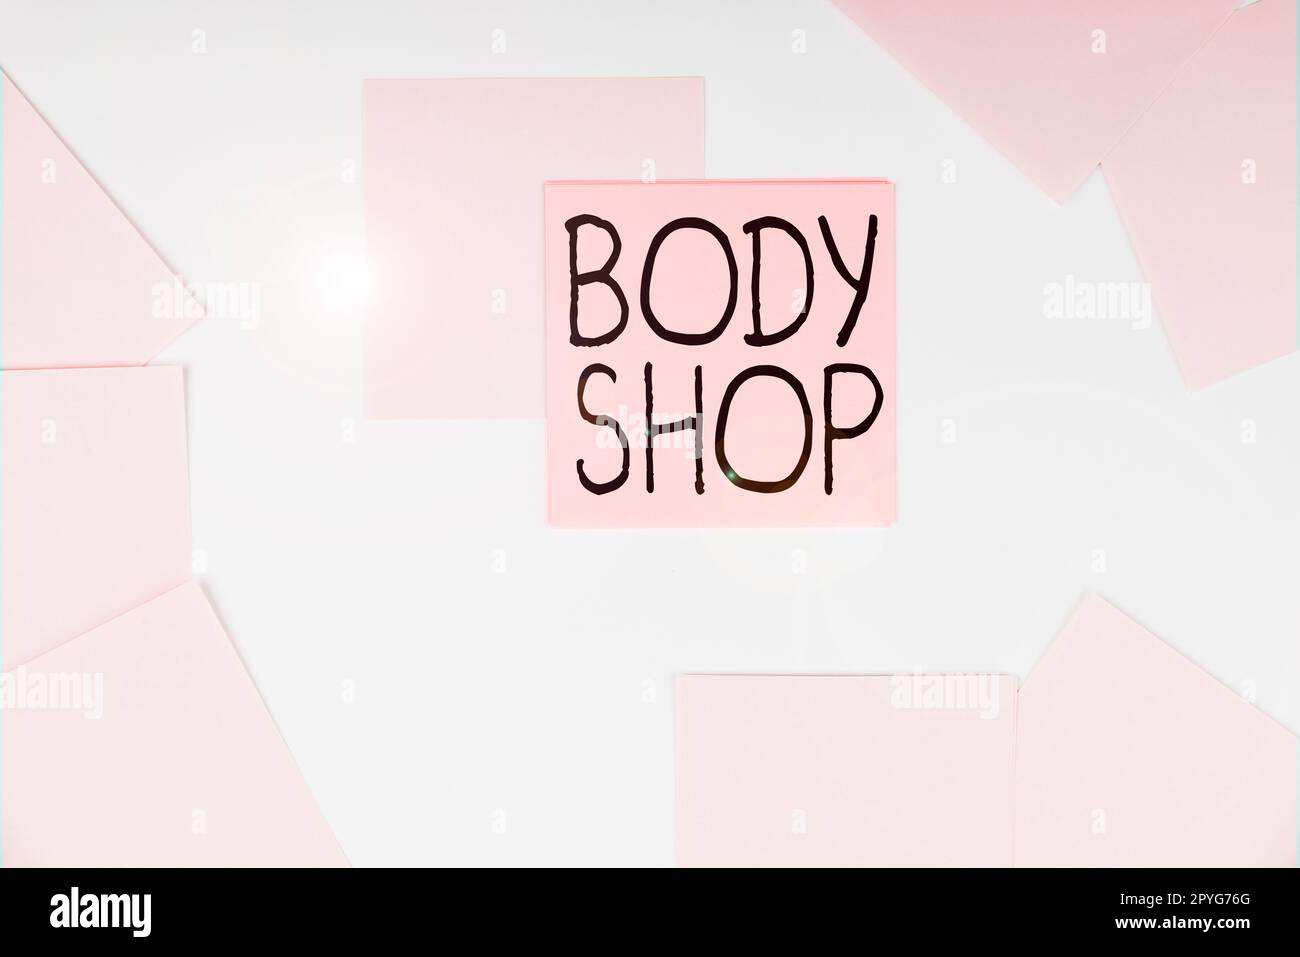 Text showing inspiration Body Shop. Word for a shop where automotive bodies are made or repaired Stock Photo